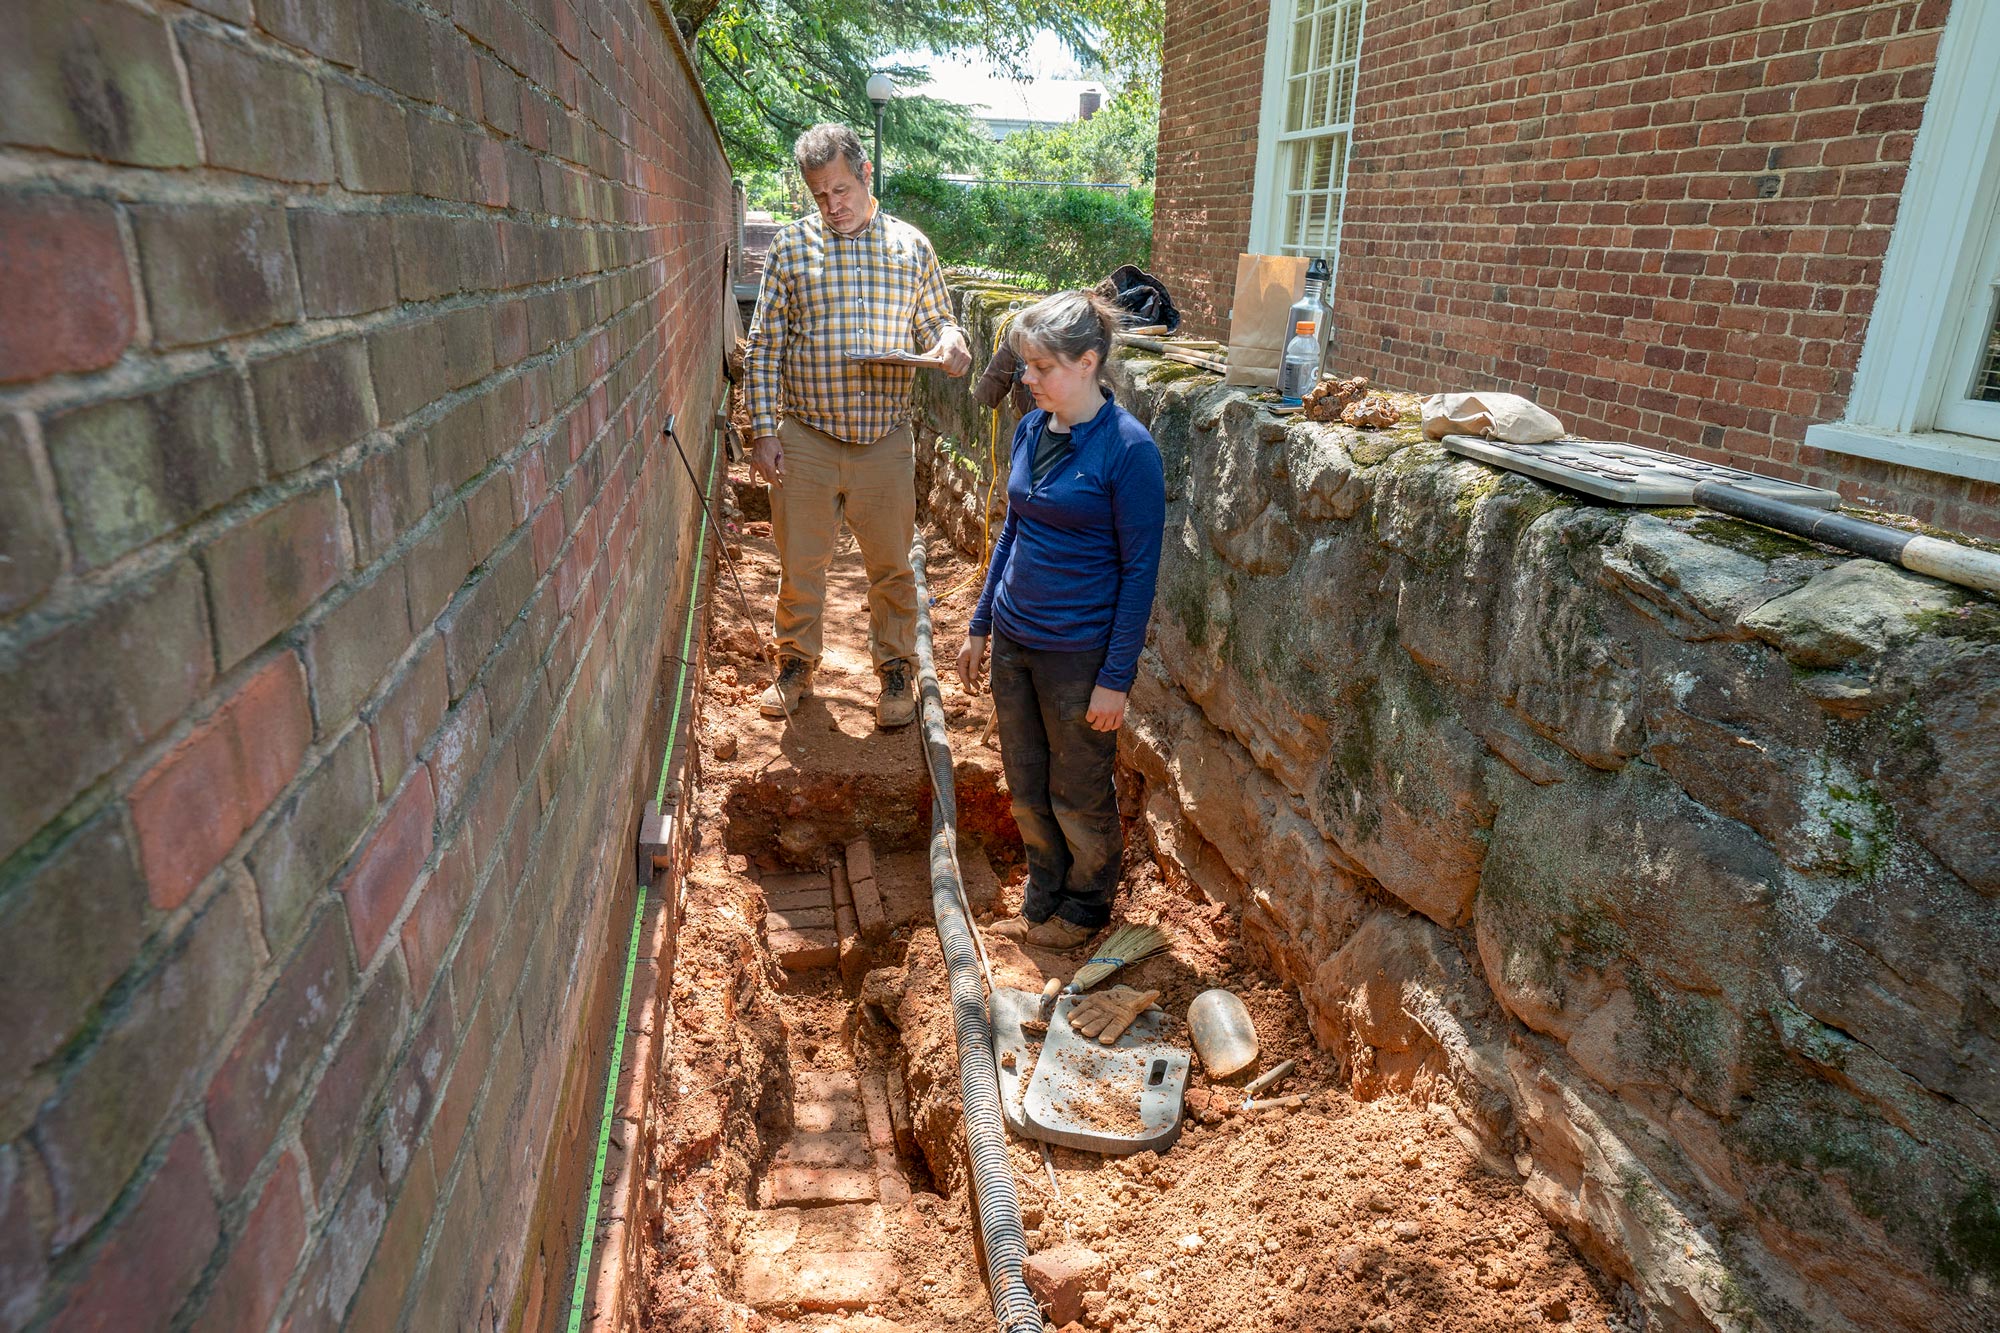 A man and a woman in work clothes stand in the dug-up path and examine bricks in the ground